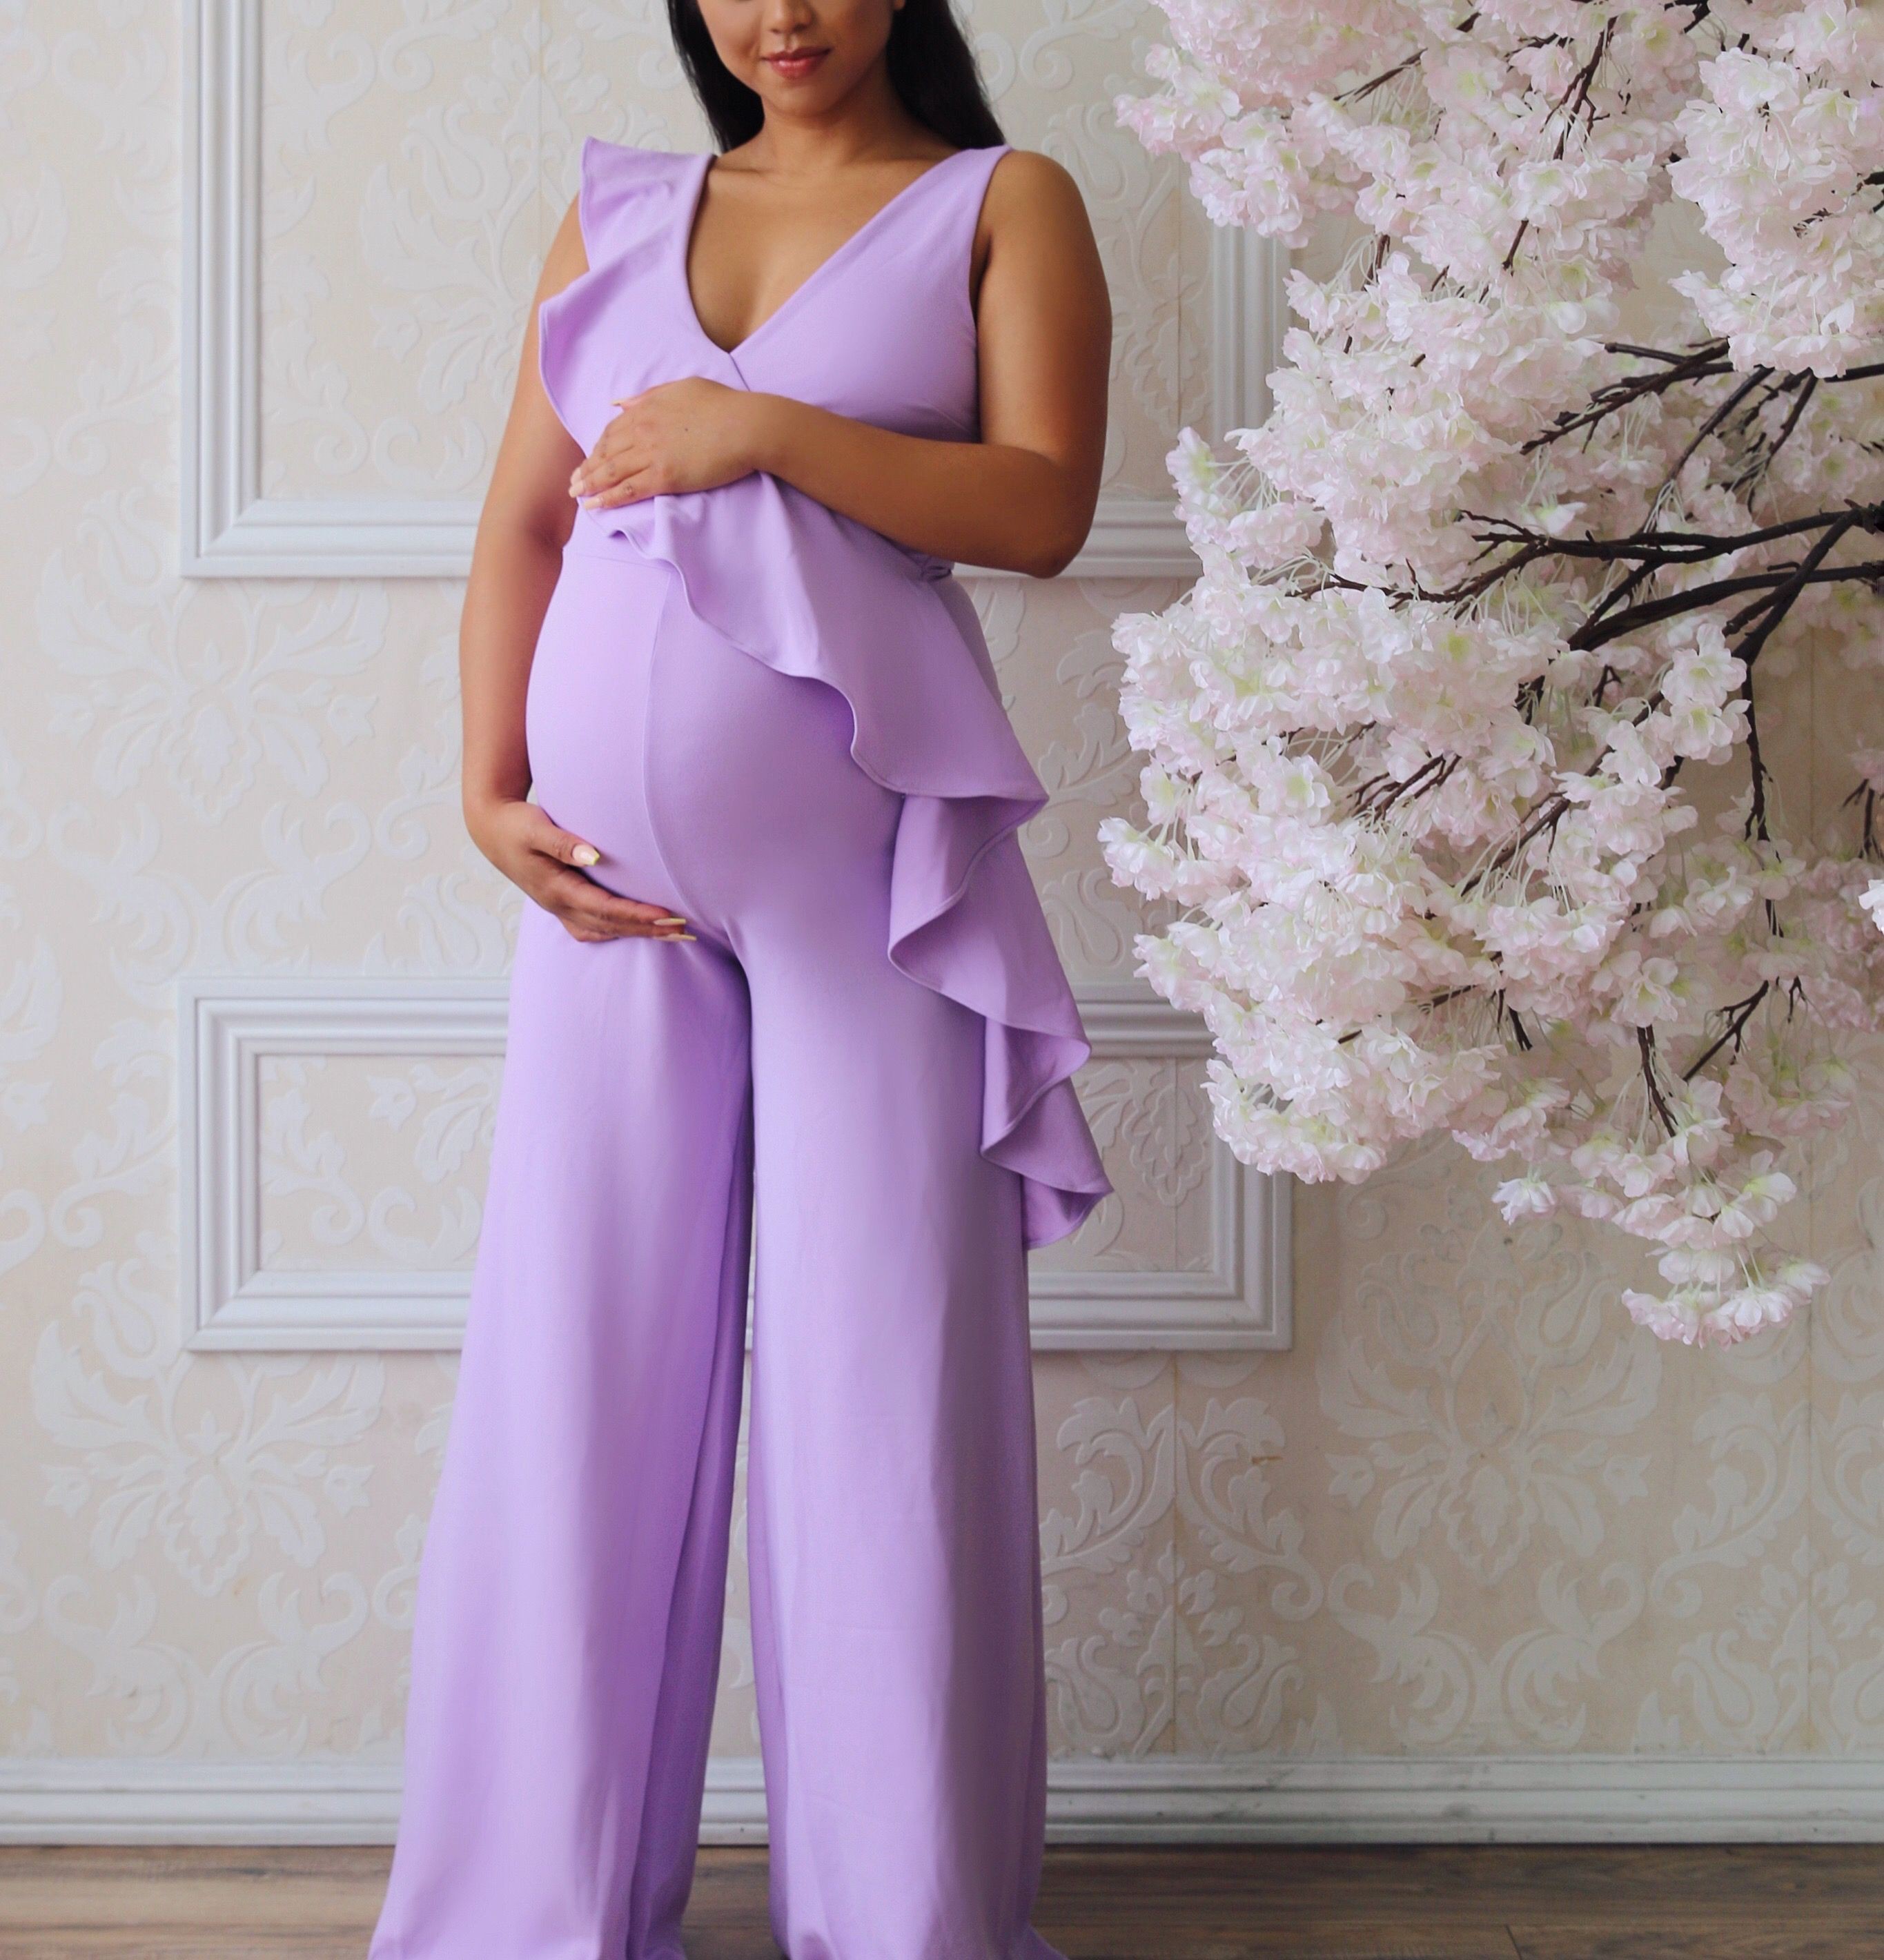 Outfit Ideas For Pregnant Ladies - Maternity Outfits, Gender reveal party, Maternity clothing